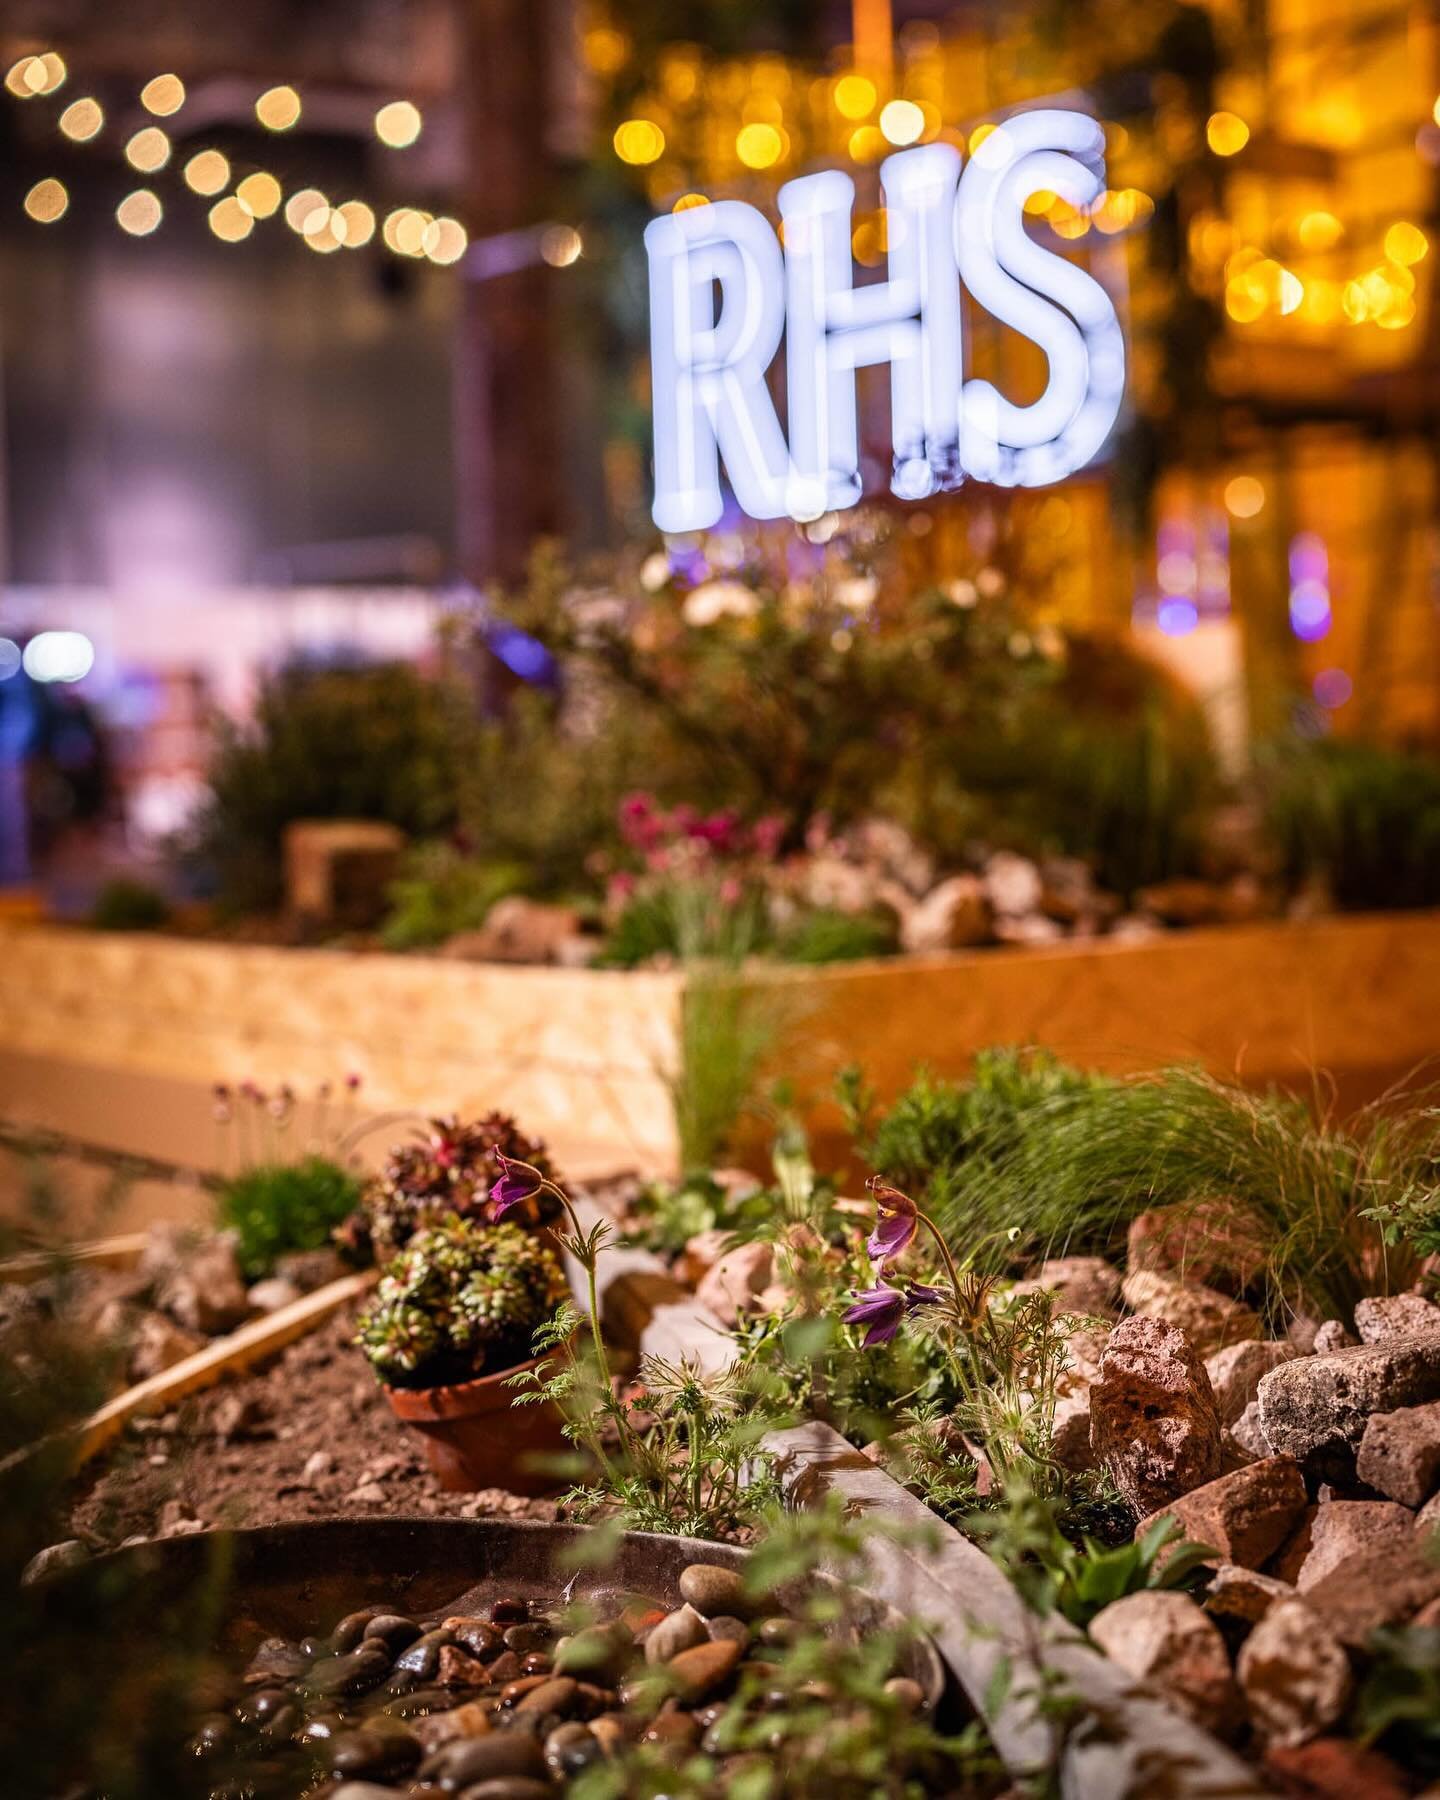 Some more details from the recent @the_rhs Urban Show. The first image features a detail from @spark.garden.design Amanda is a  designer who is based local to me in Derbyshire. I loved her Punk Rockery garden with its 24-Hour Party Planting 😊🌱
The 